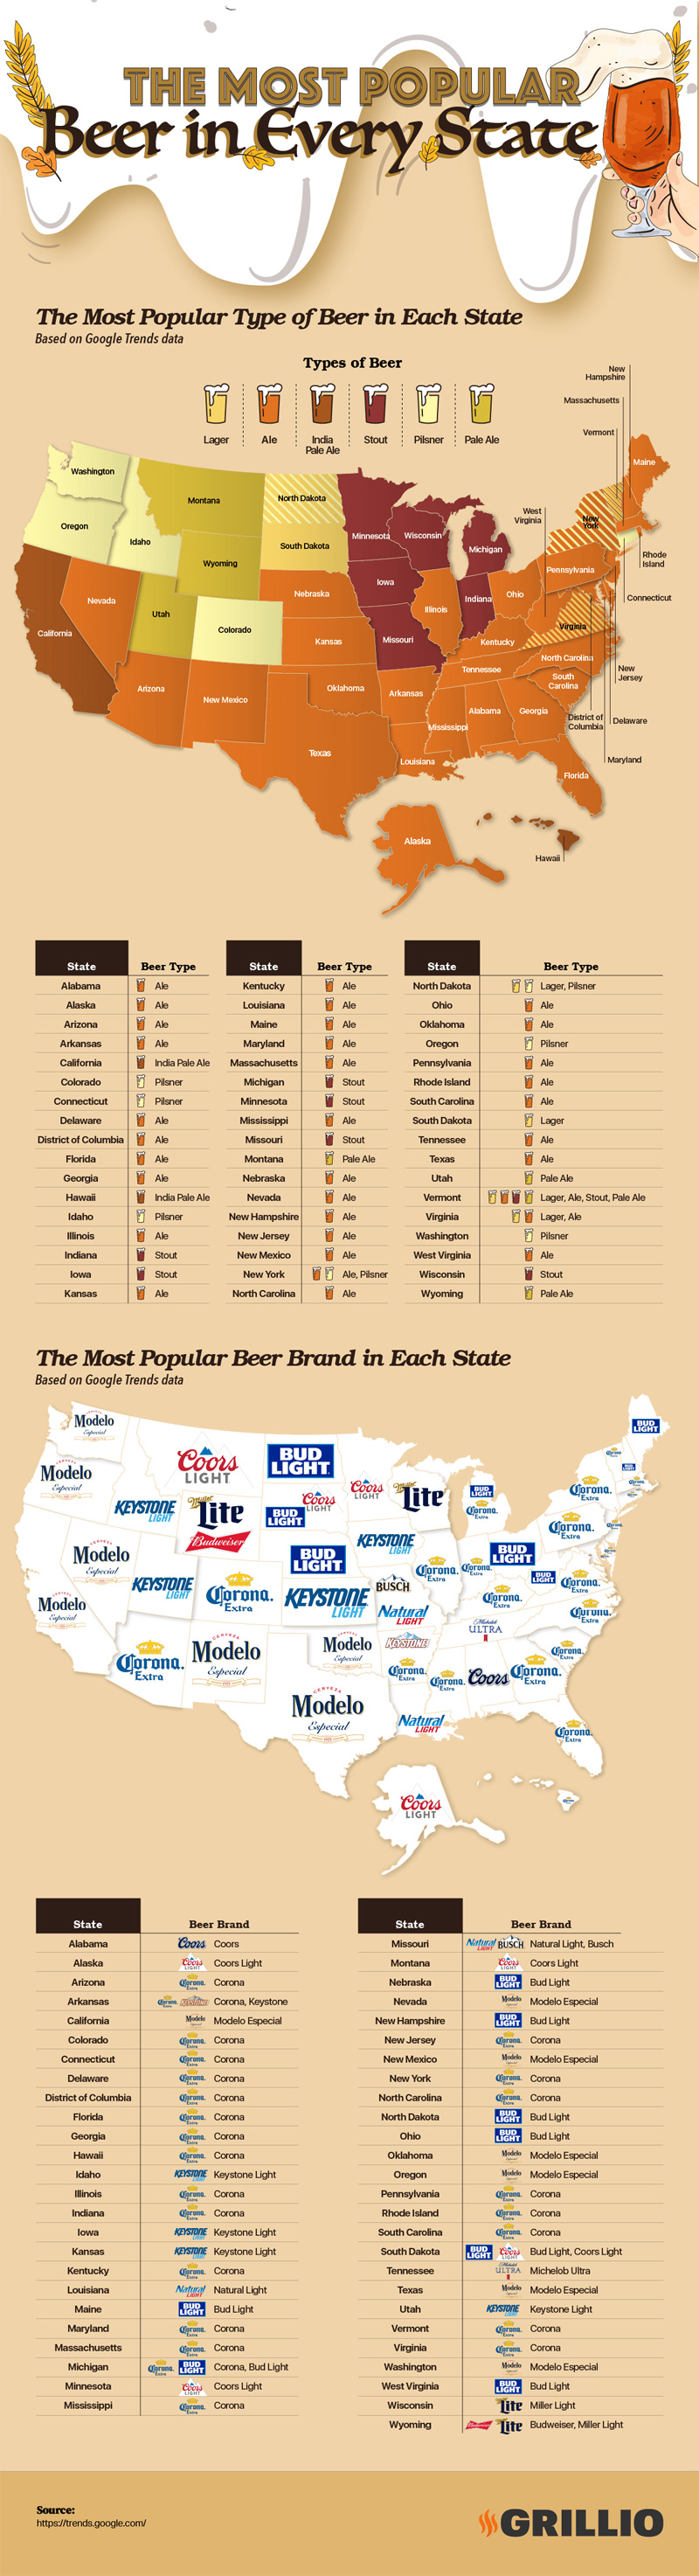 The state's most popular beer